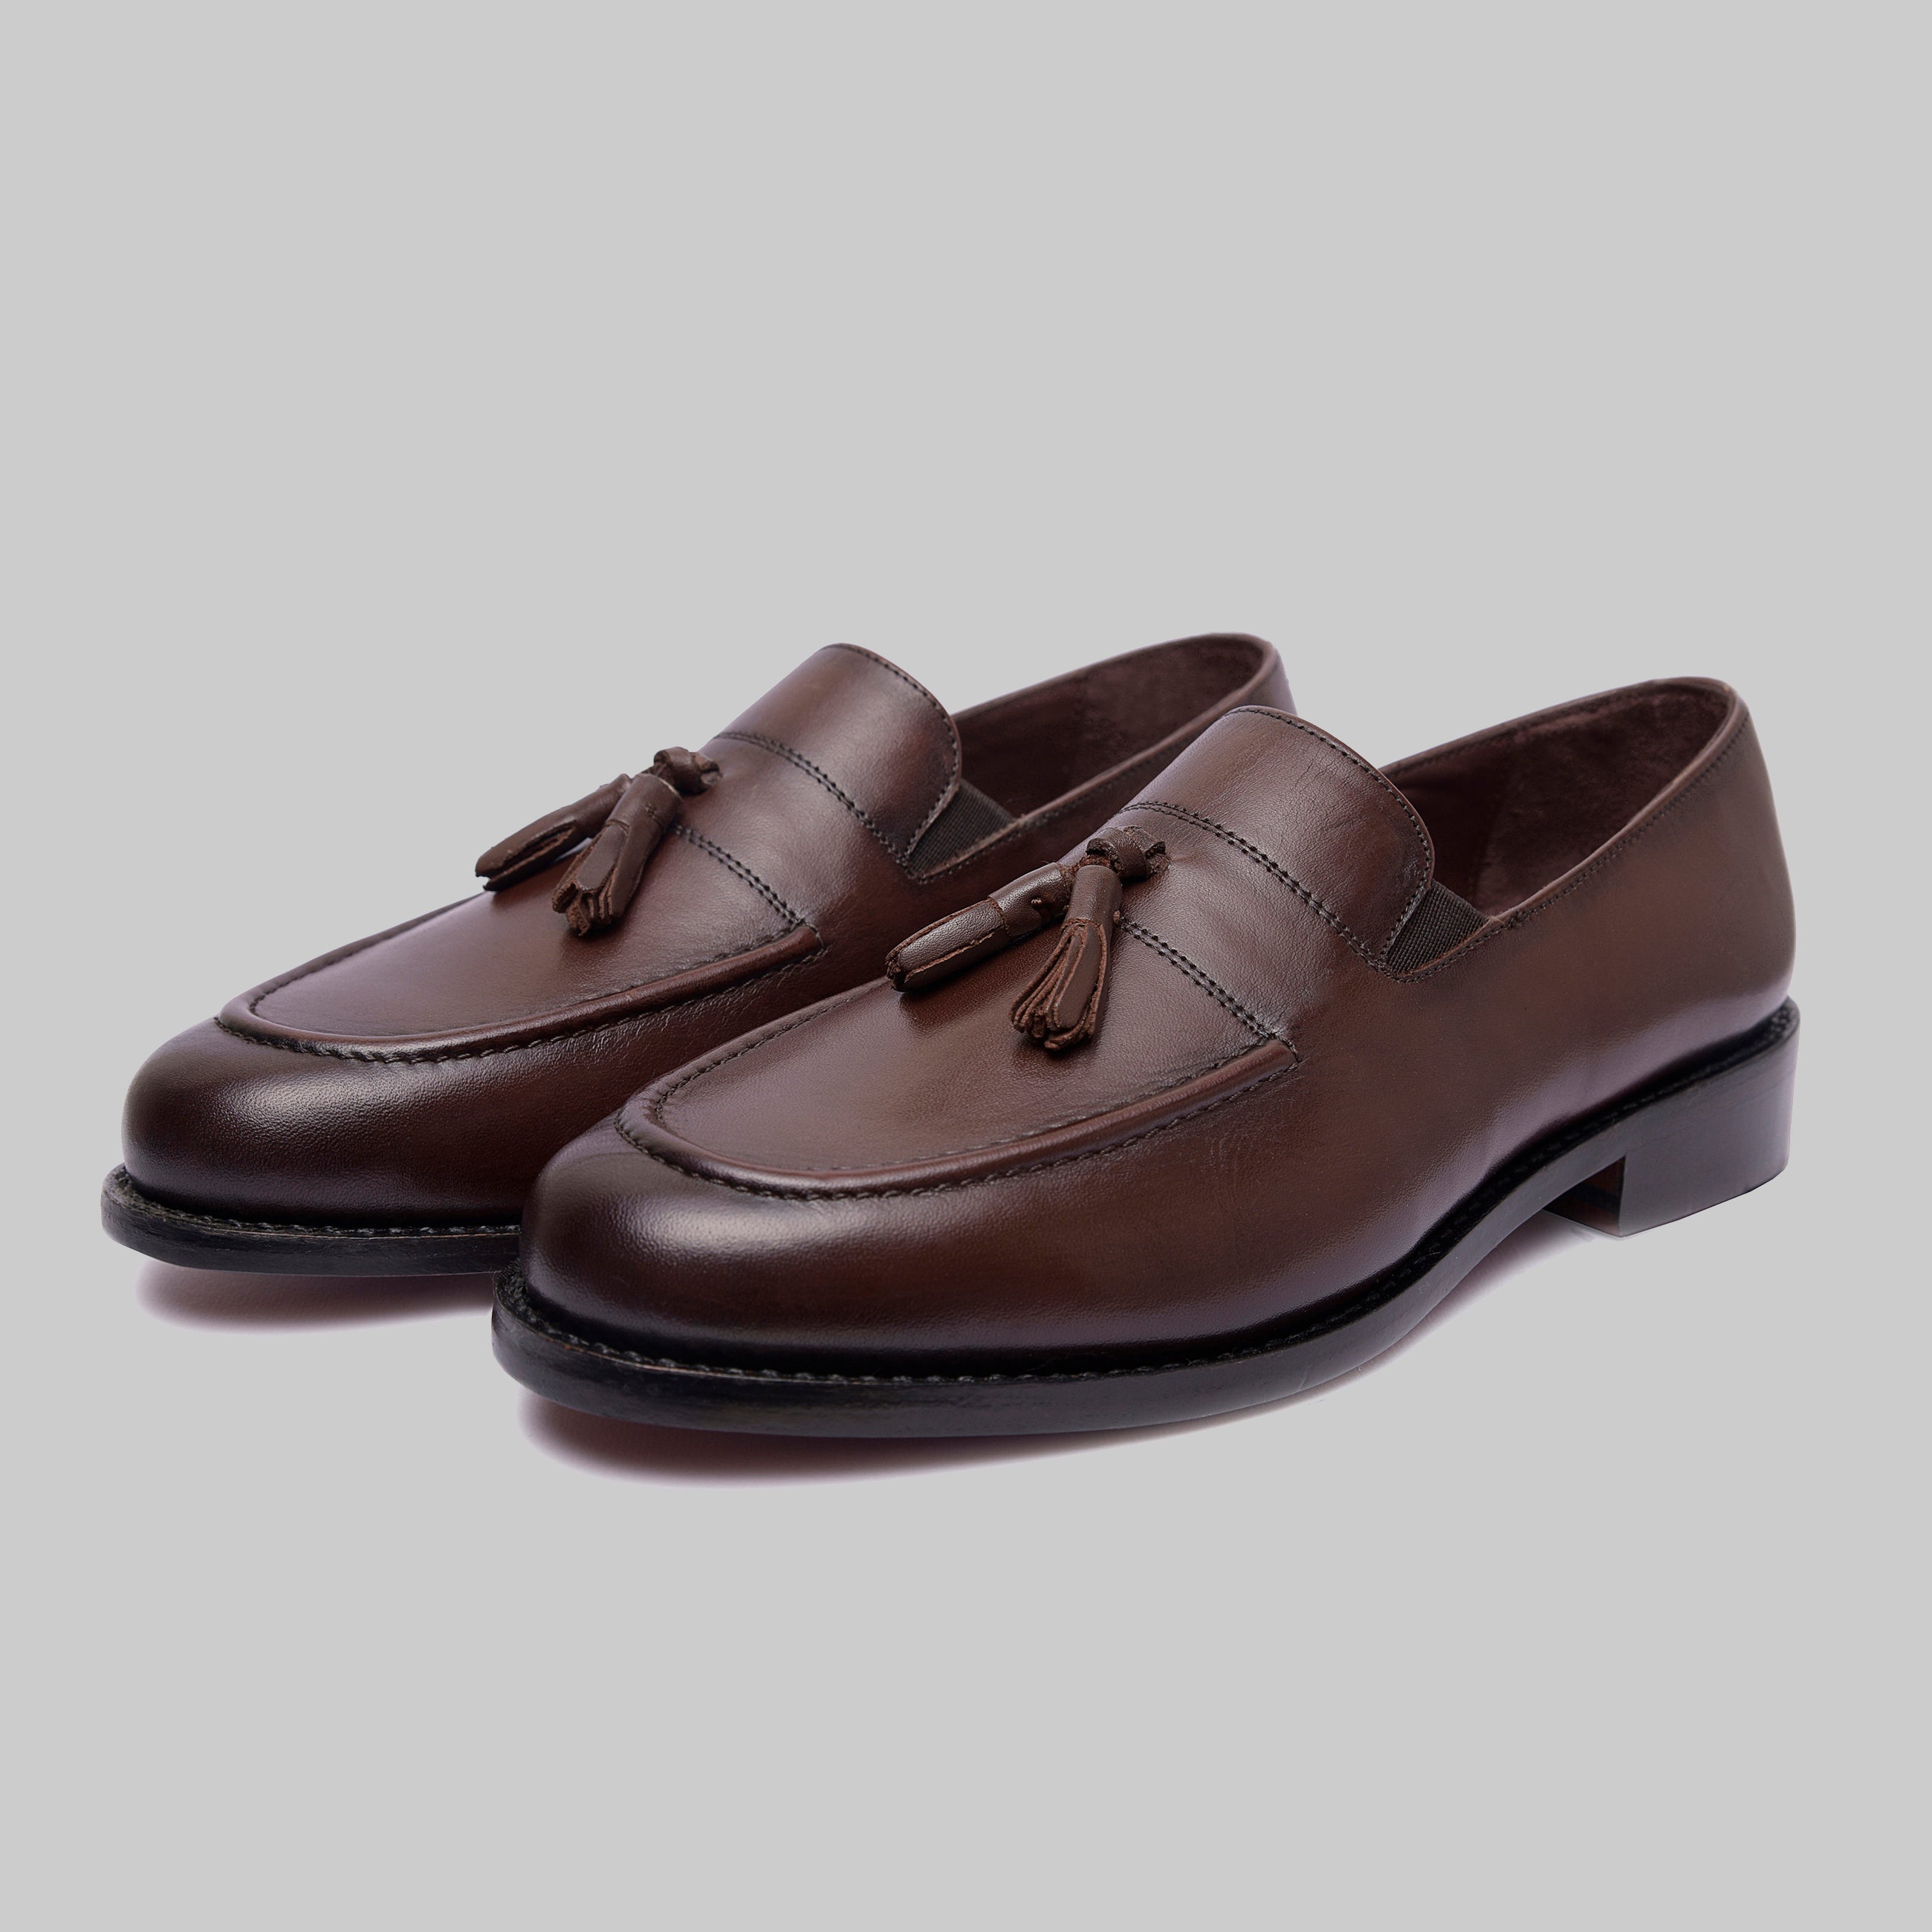 Jager Goodyear Welted Formal Tassel Penny Loafers